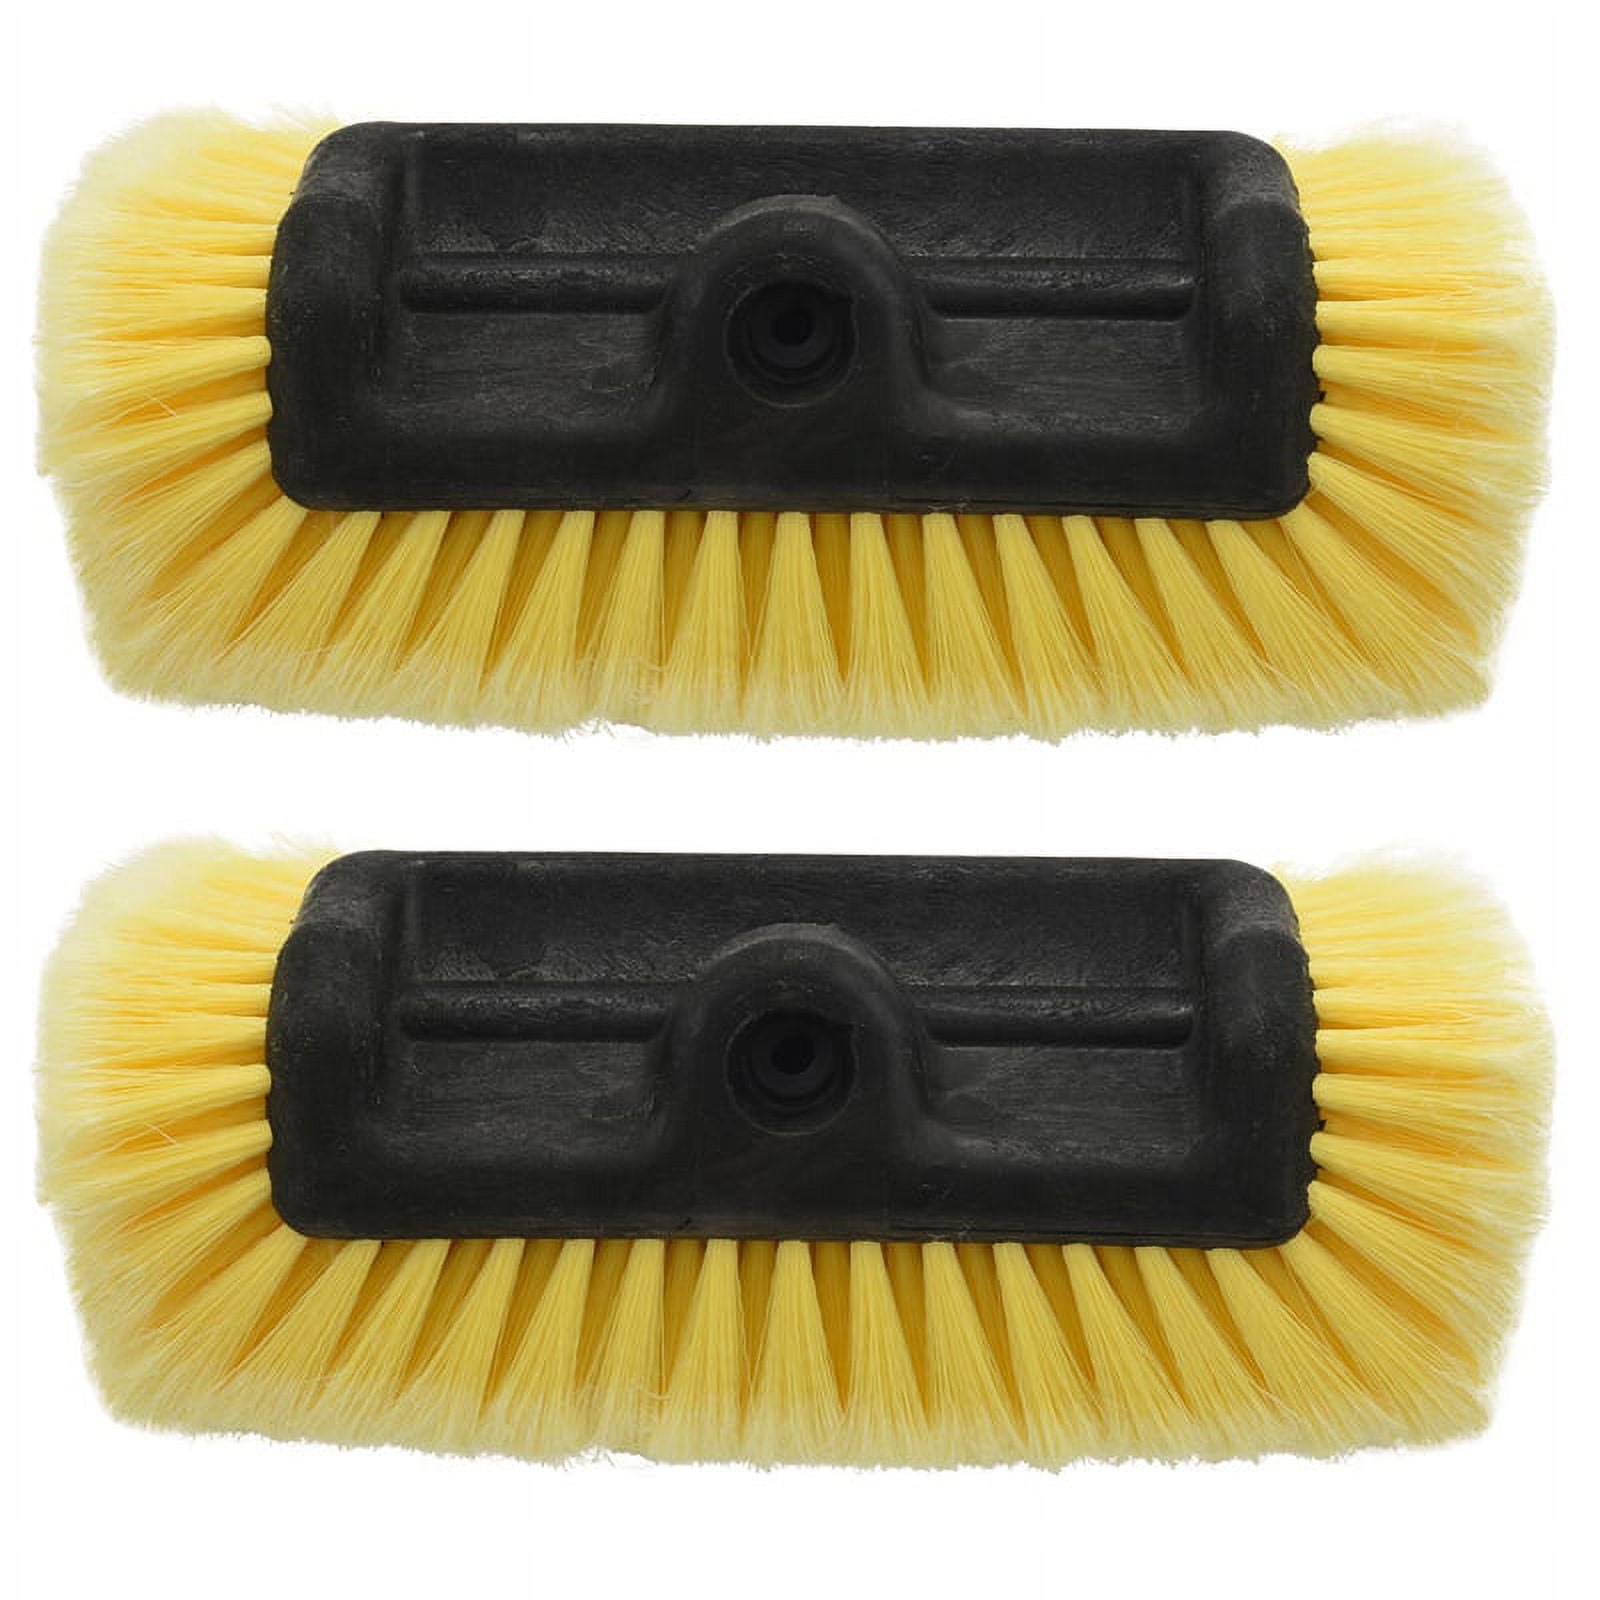  CARCAREZ 10 Car Wash Brush Head with Soft Bristle for Auto RV  Truck Boat Camper Exterior Washing Cleaning, Yellow : Automotive